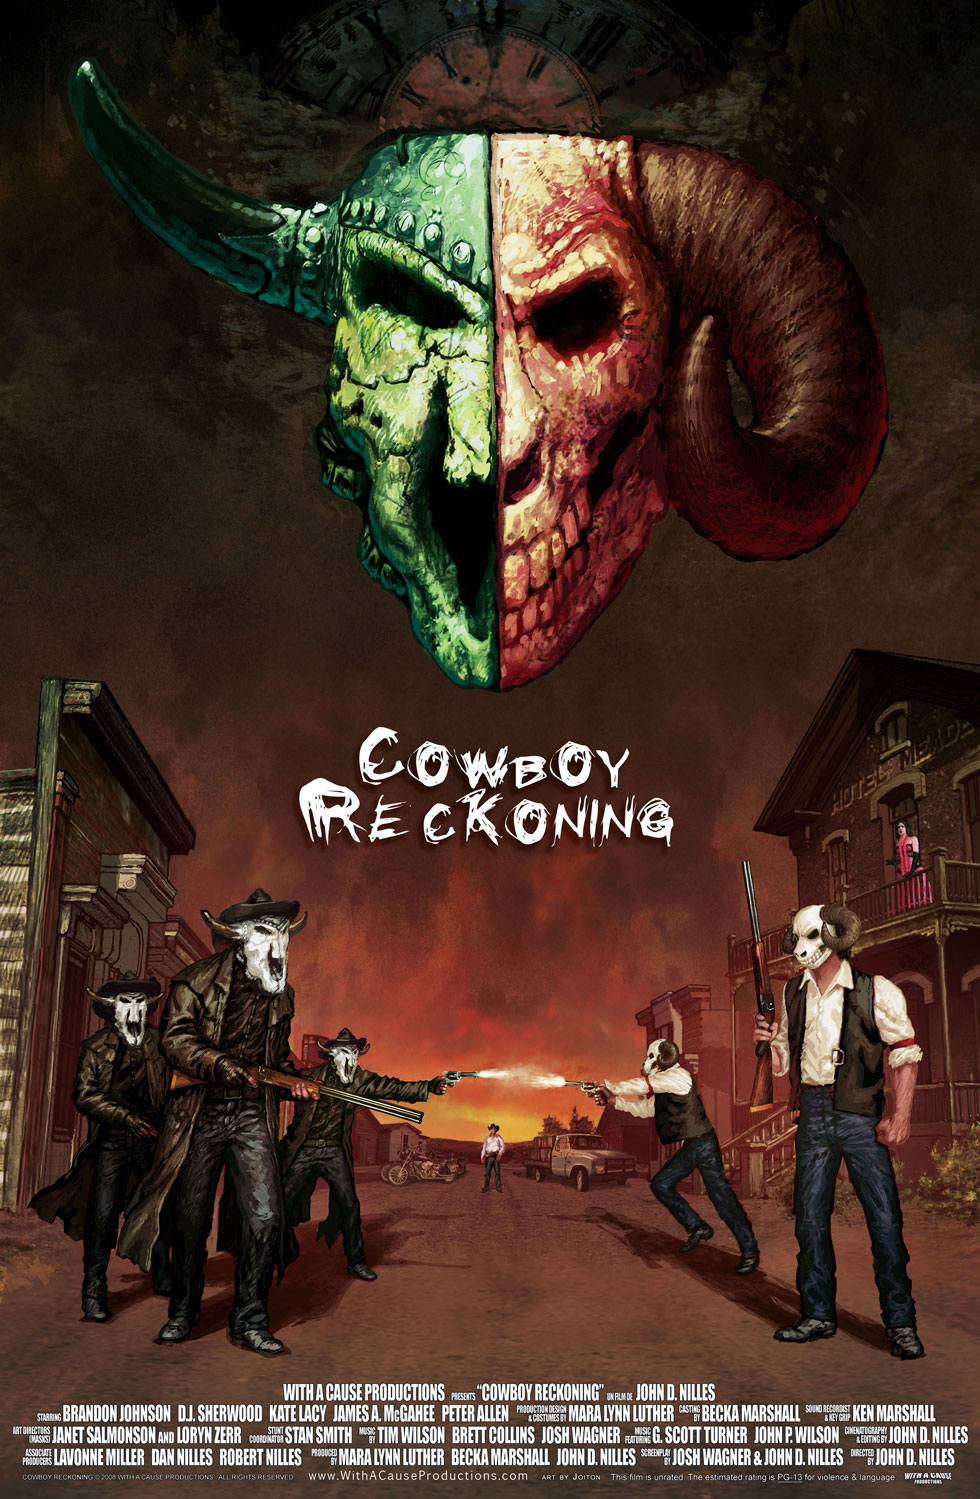 Poster for the Western movie Cowboy Reckoning